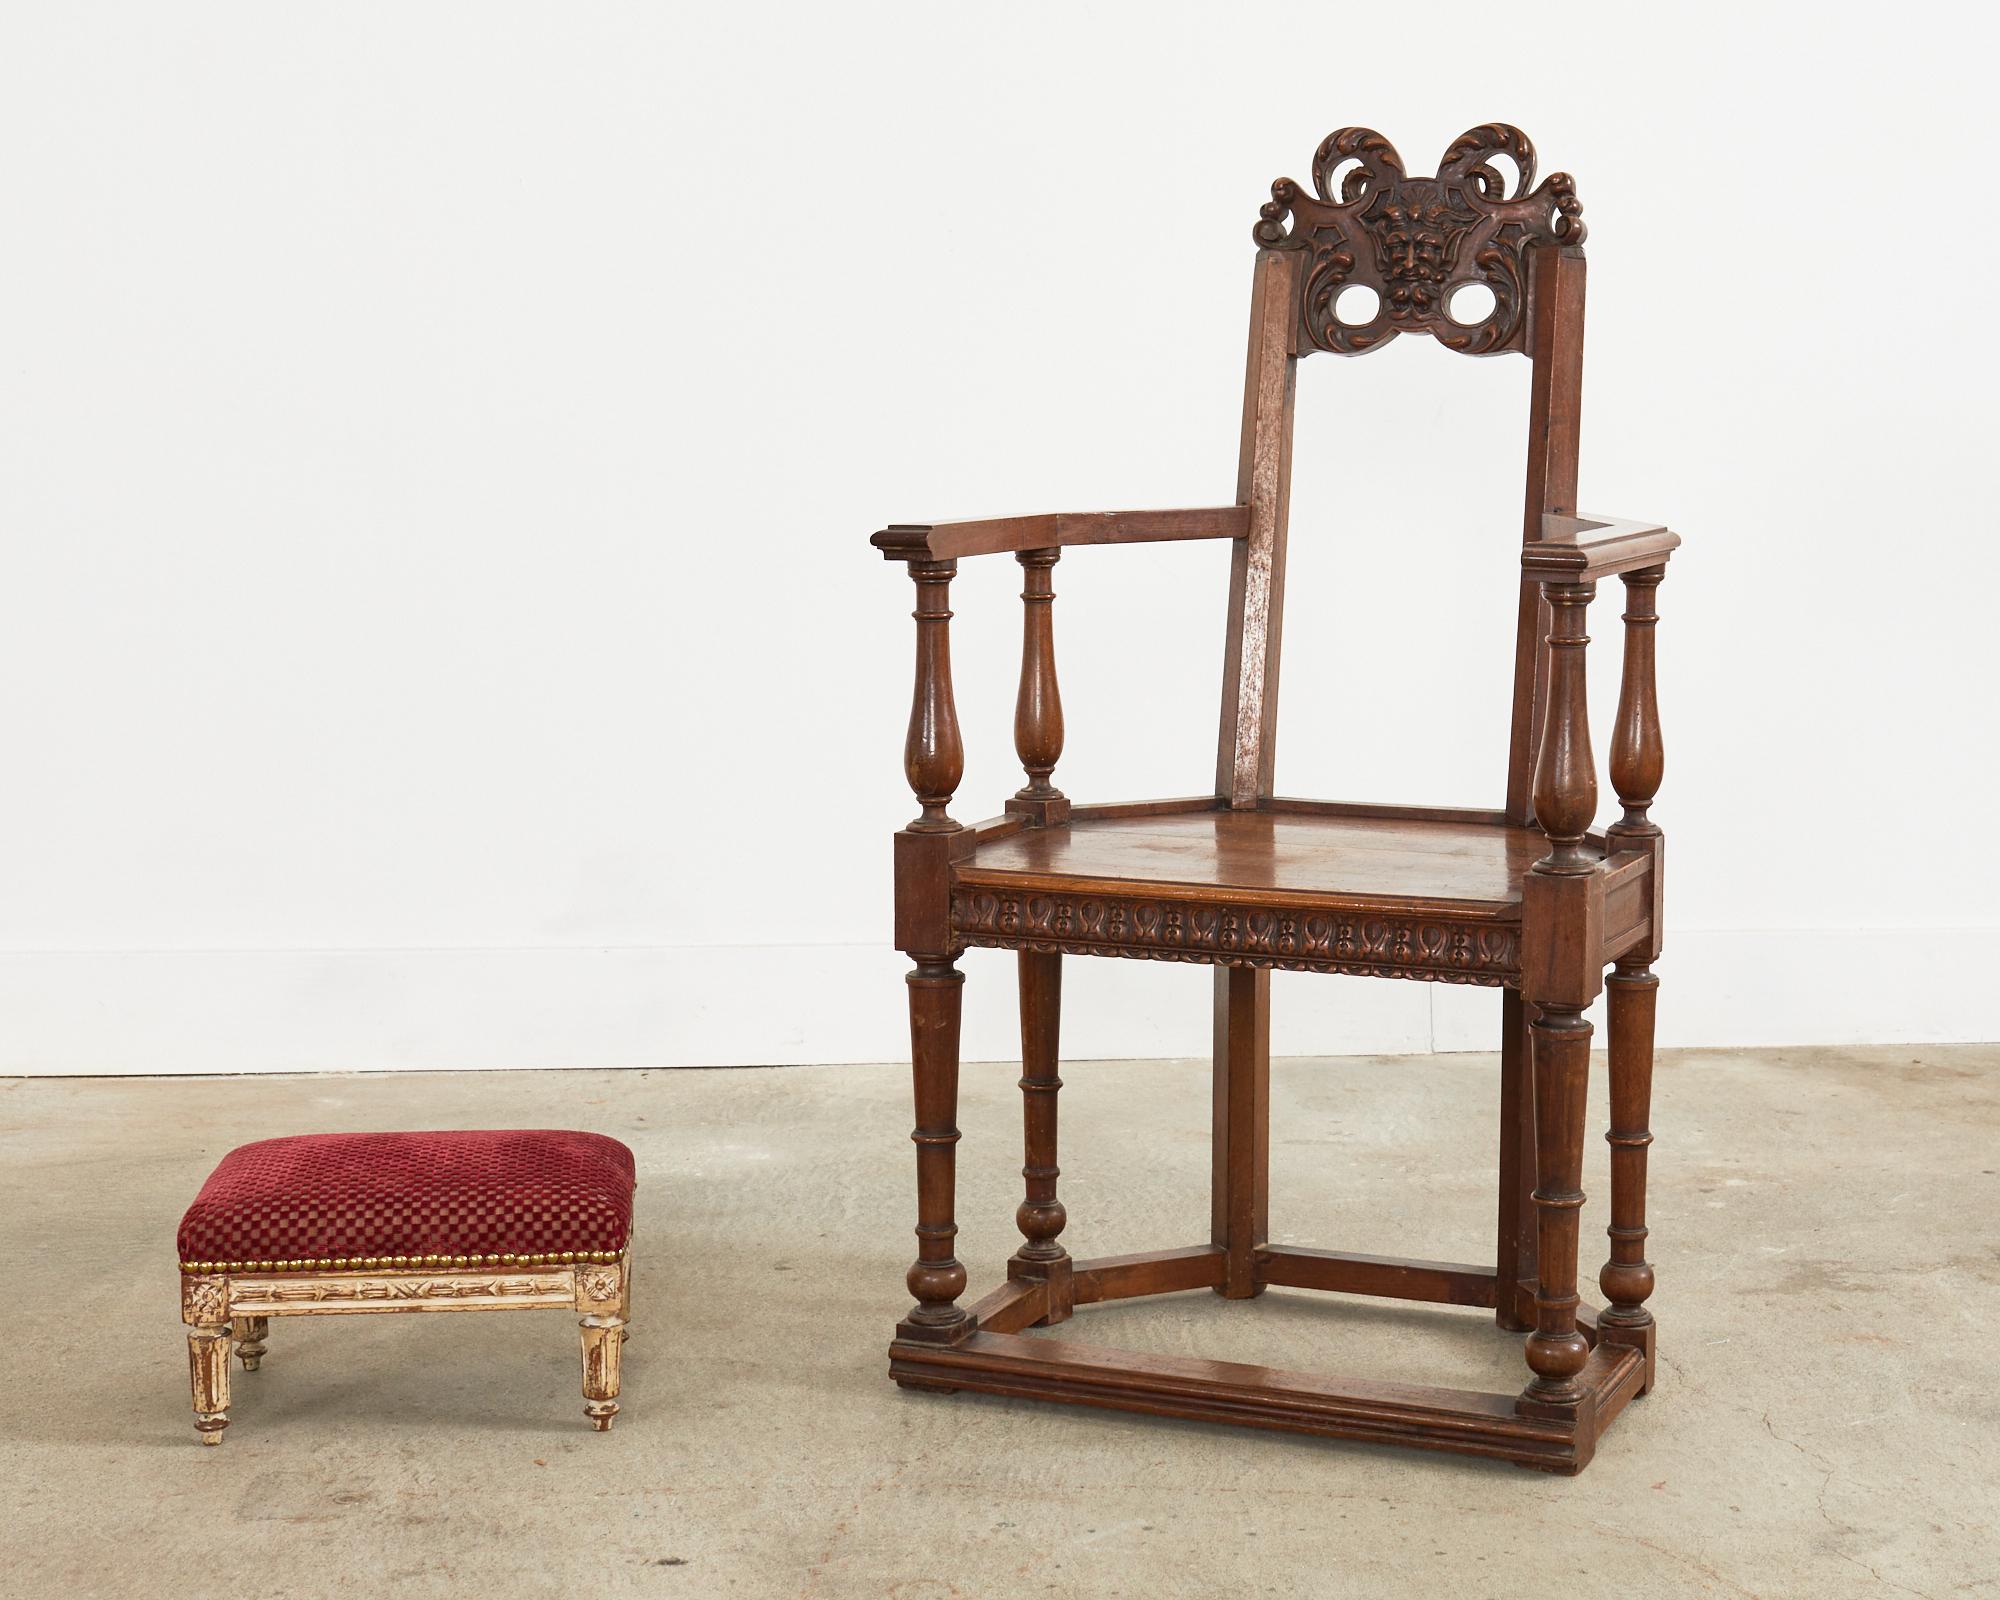 Charming diminutive or petite footstool in the French Louis XVI taste. The stool features a hand-carved painted mahogany frame with neoclassical motifs. The rectangular form is supported by fluted legs topped with square rosettes. Upholstered with a